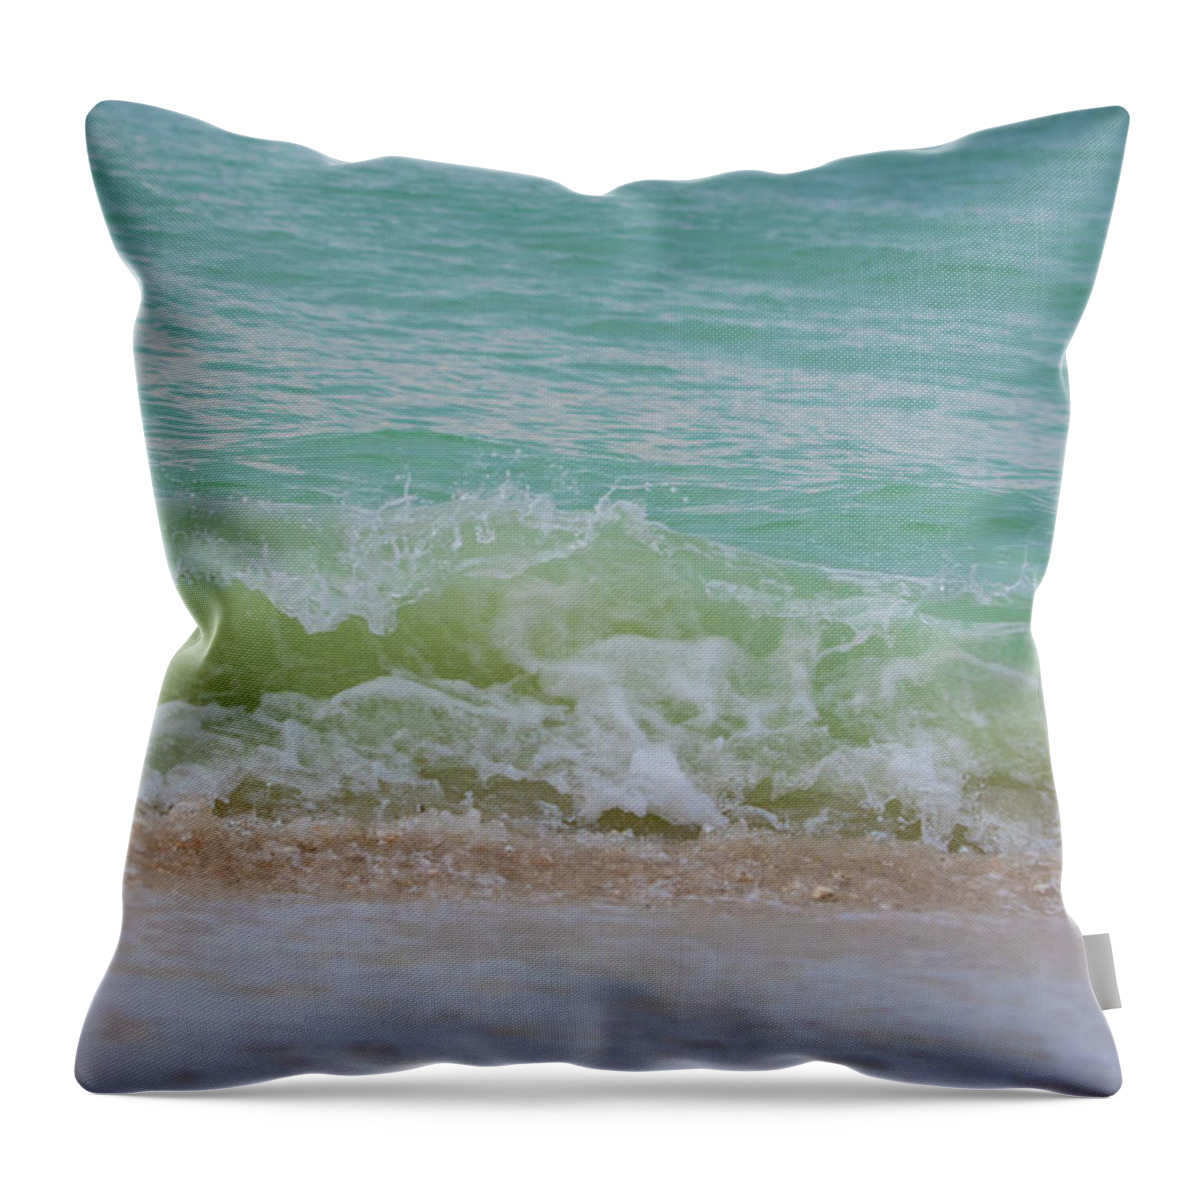 Wave Throw Pillow featuring the photograph Colorful Wave by Artful Imagery